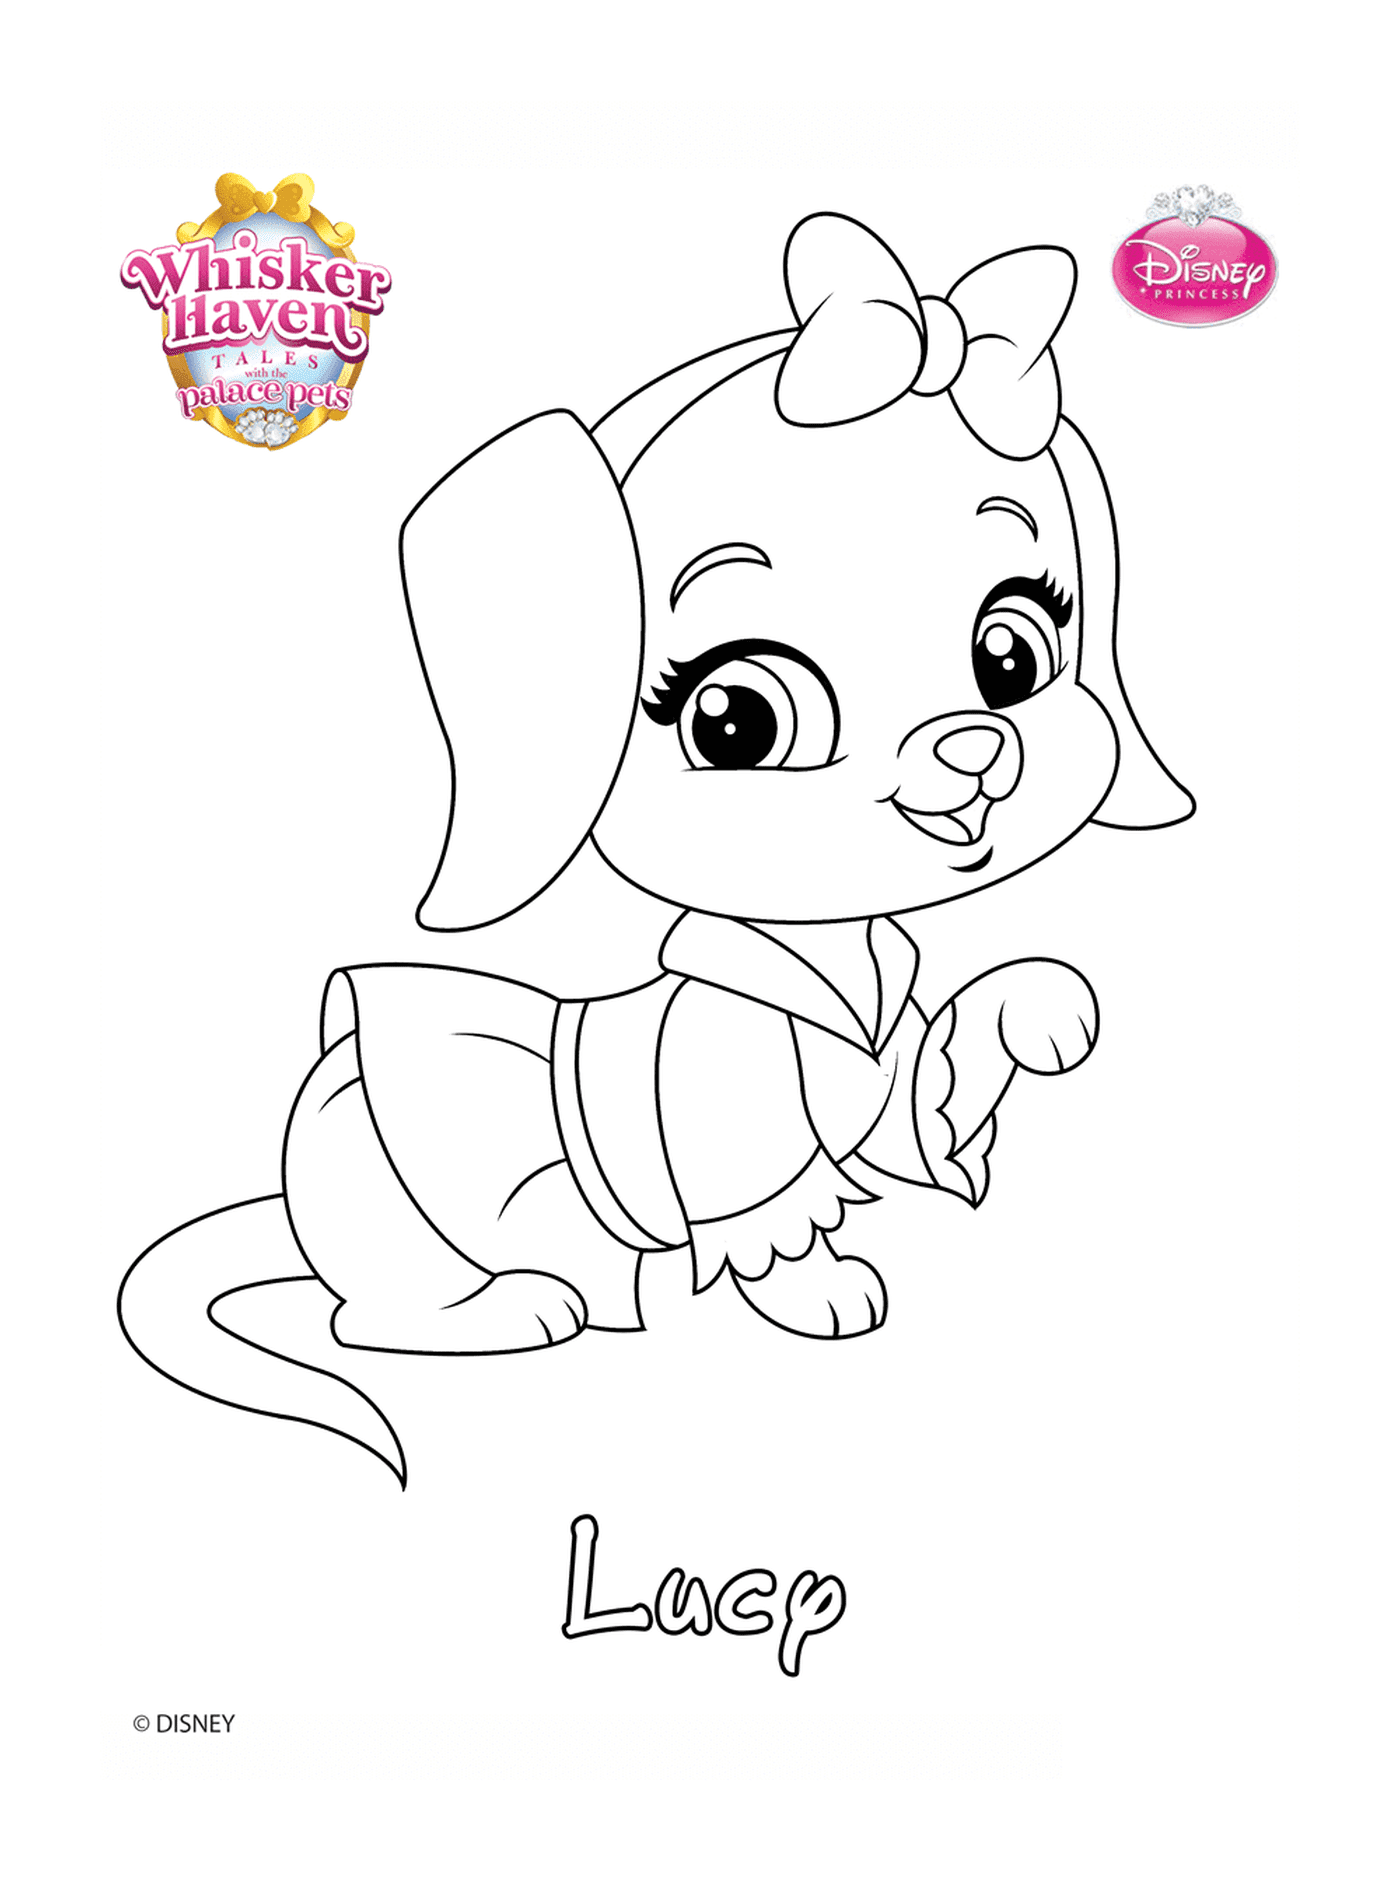 coloriage whisker haven lucy princess disney